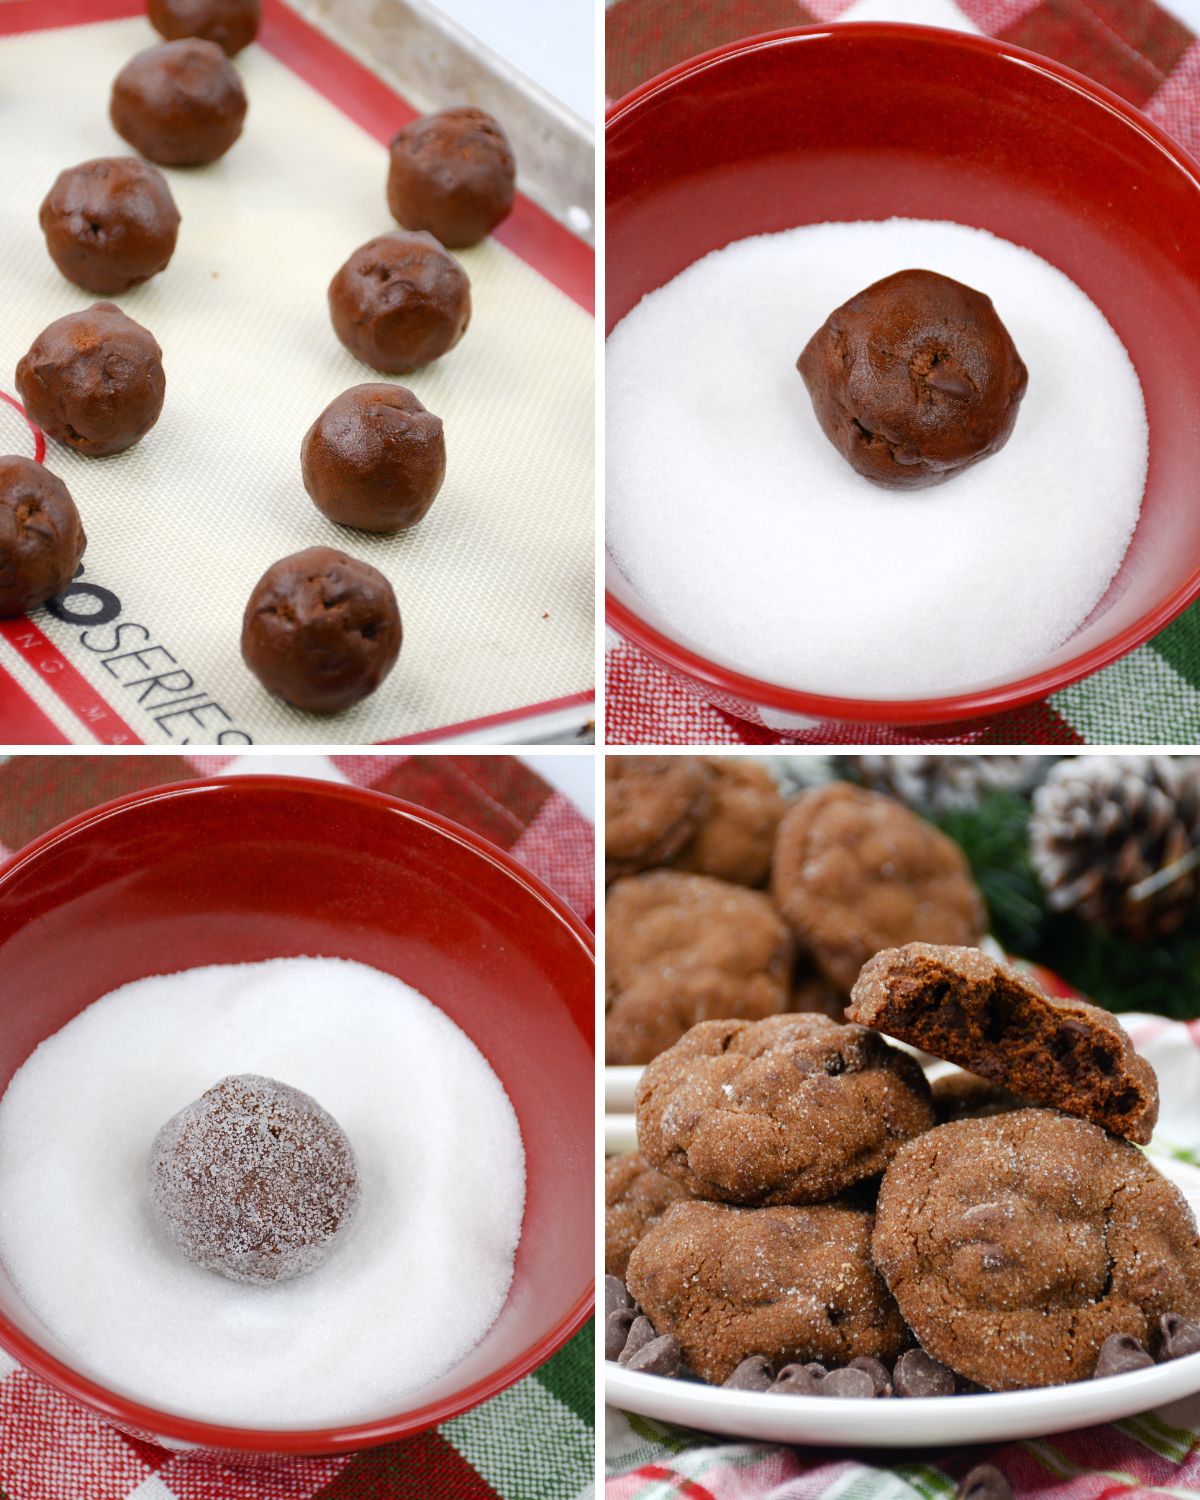 Steps to make chocolate gingerbread cookies.